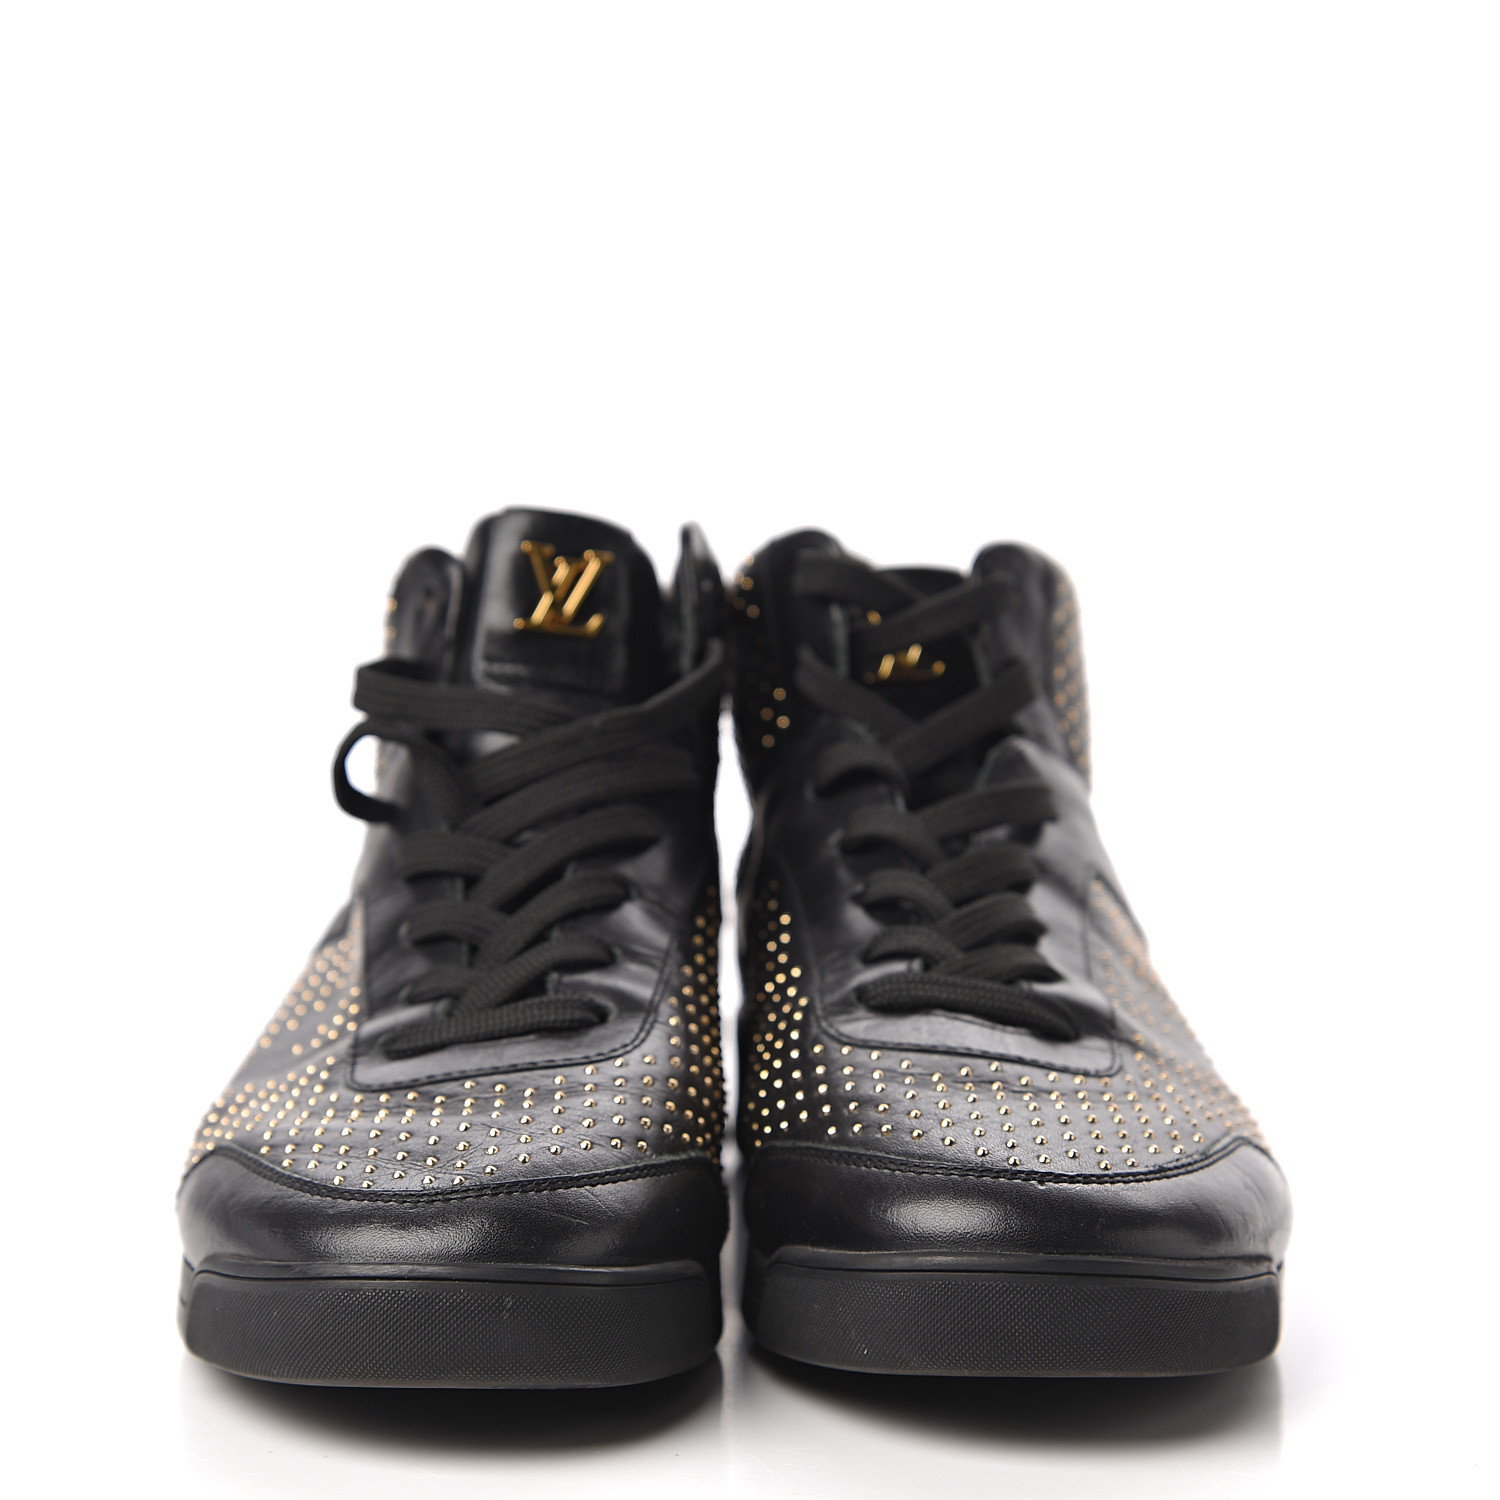 LOUIS VUITTON Studded High Top Sneakers 37 Black 538713